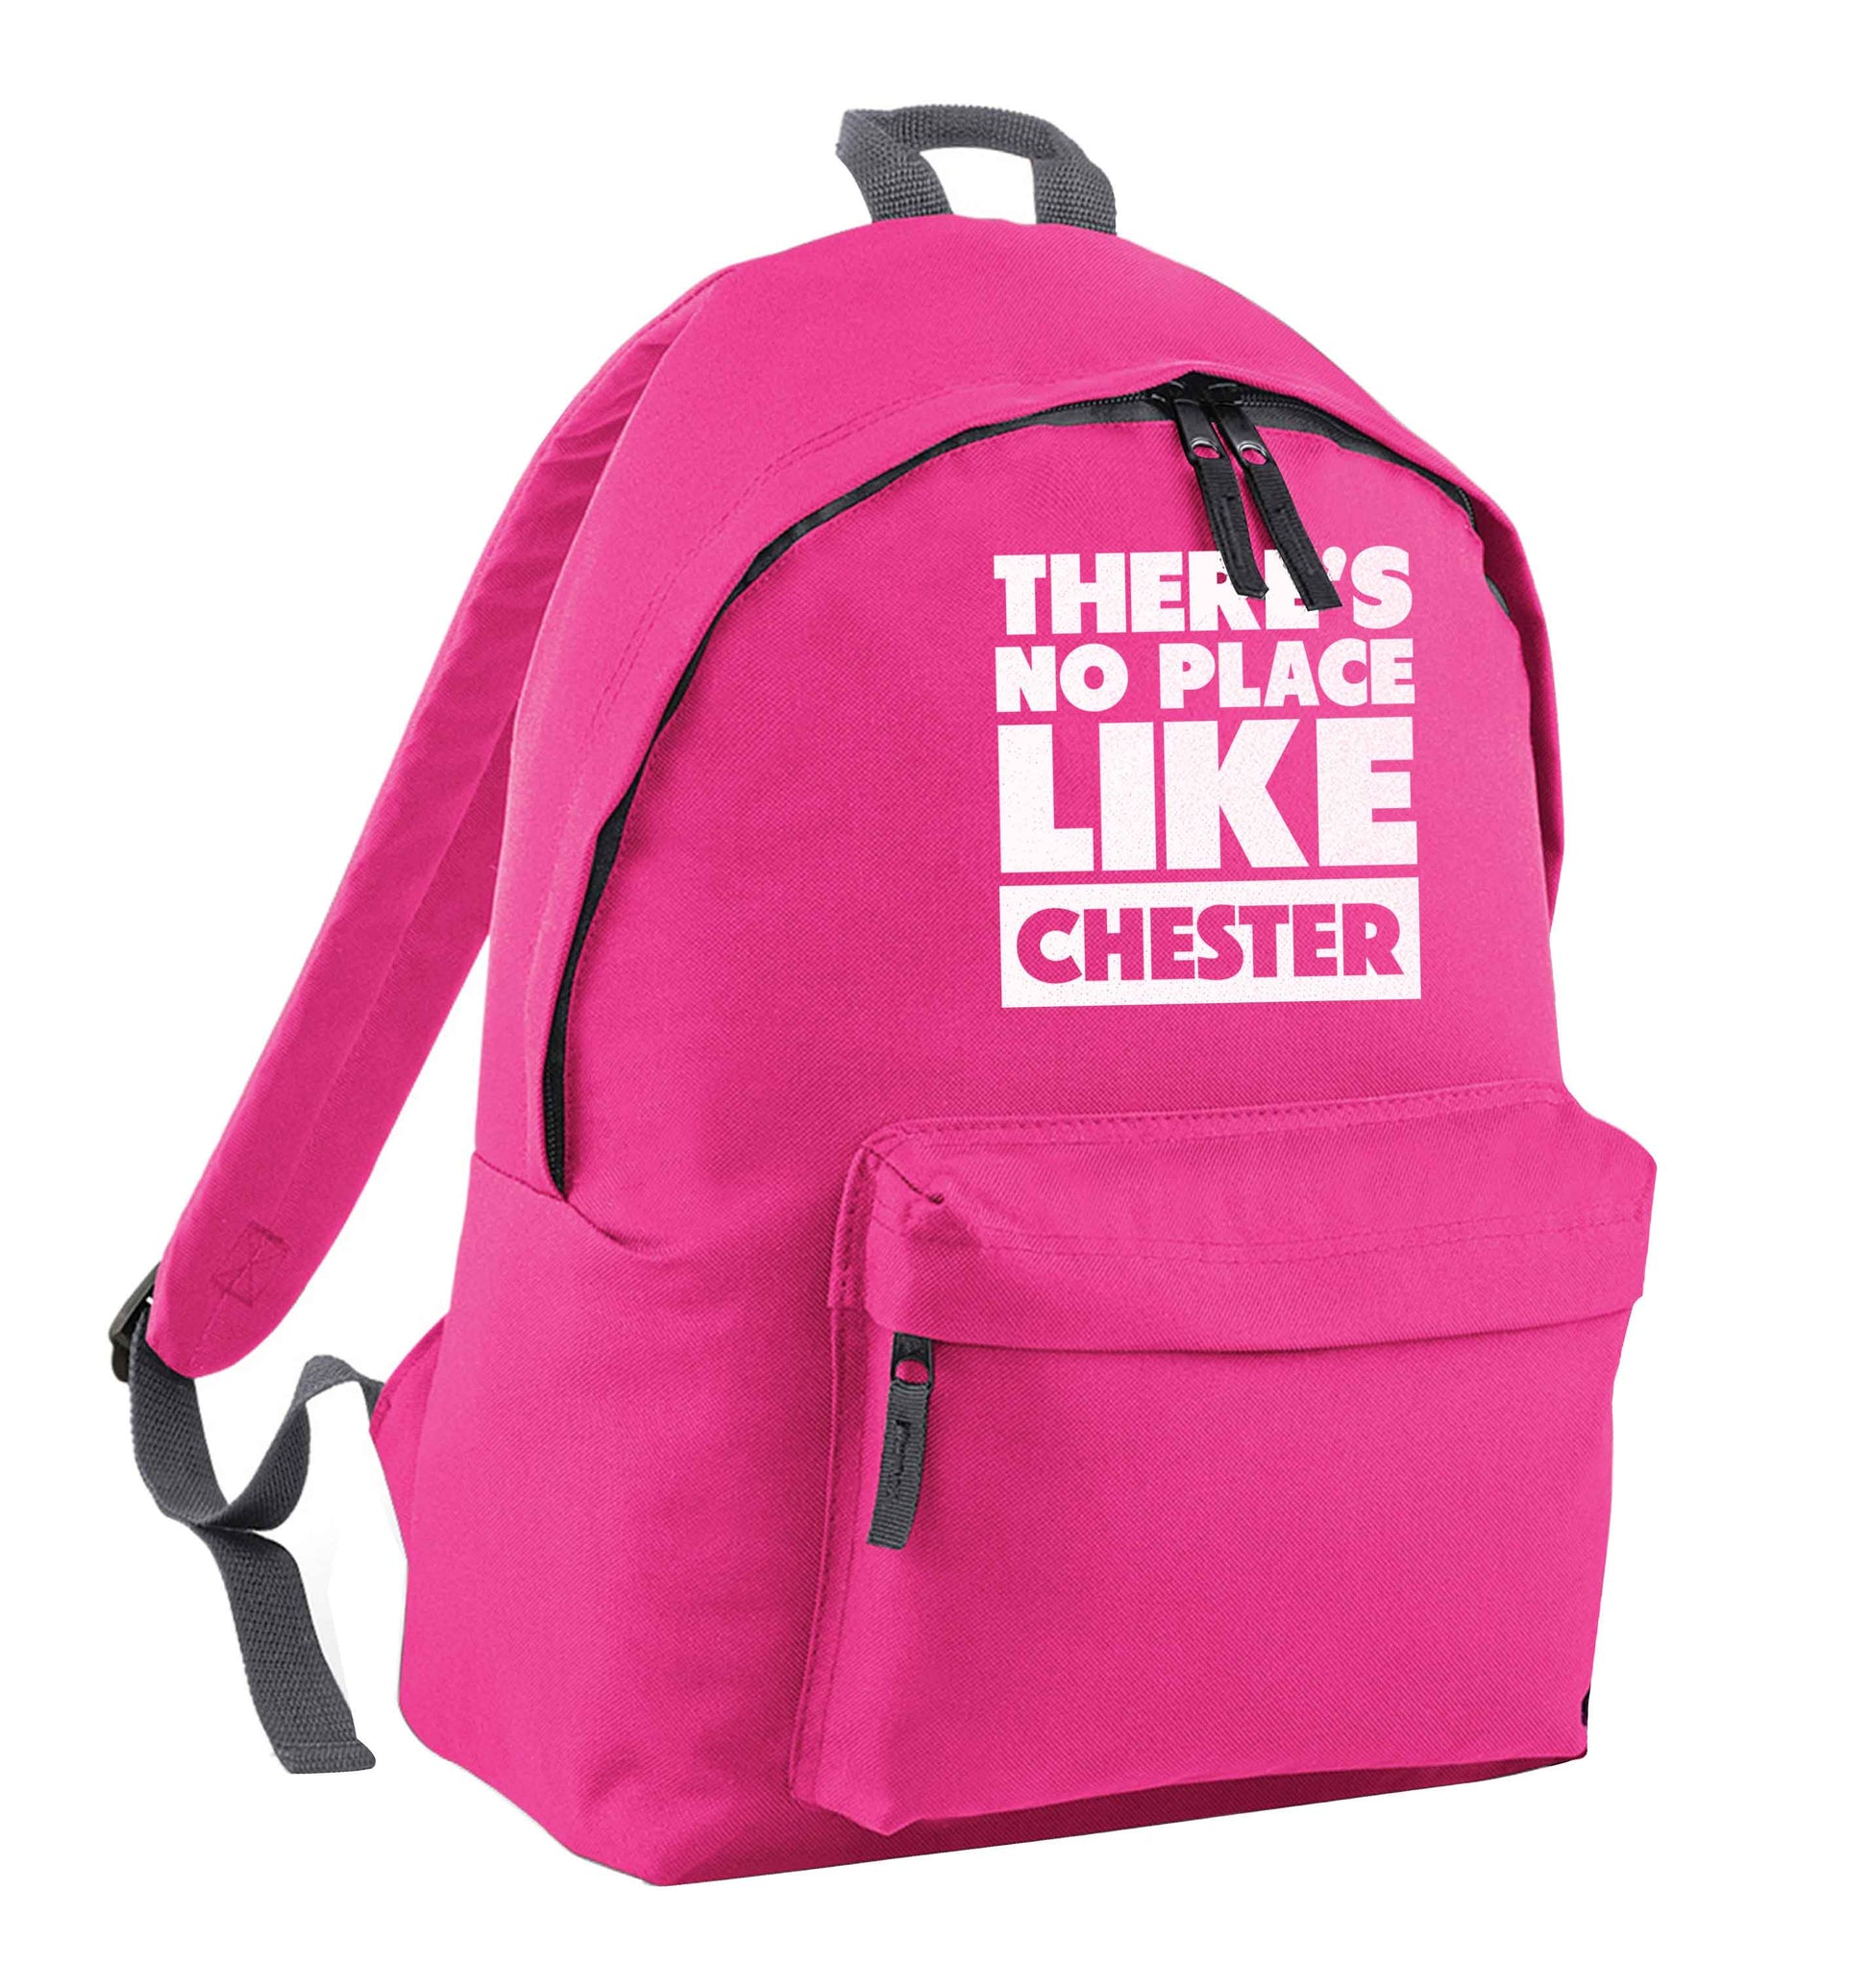 There's no place like Chester pink children's backpack